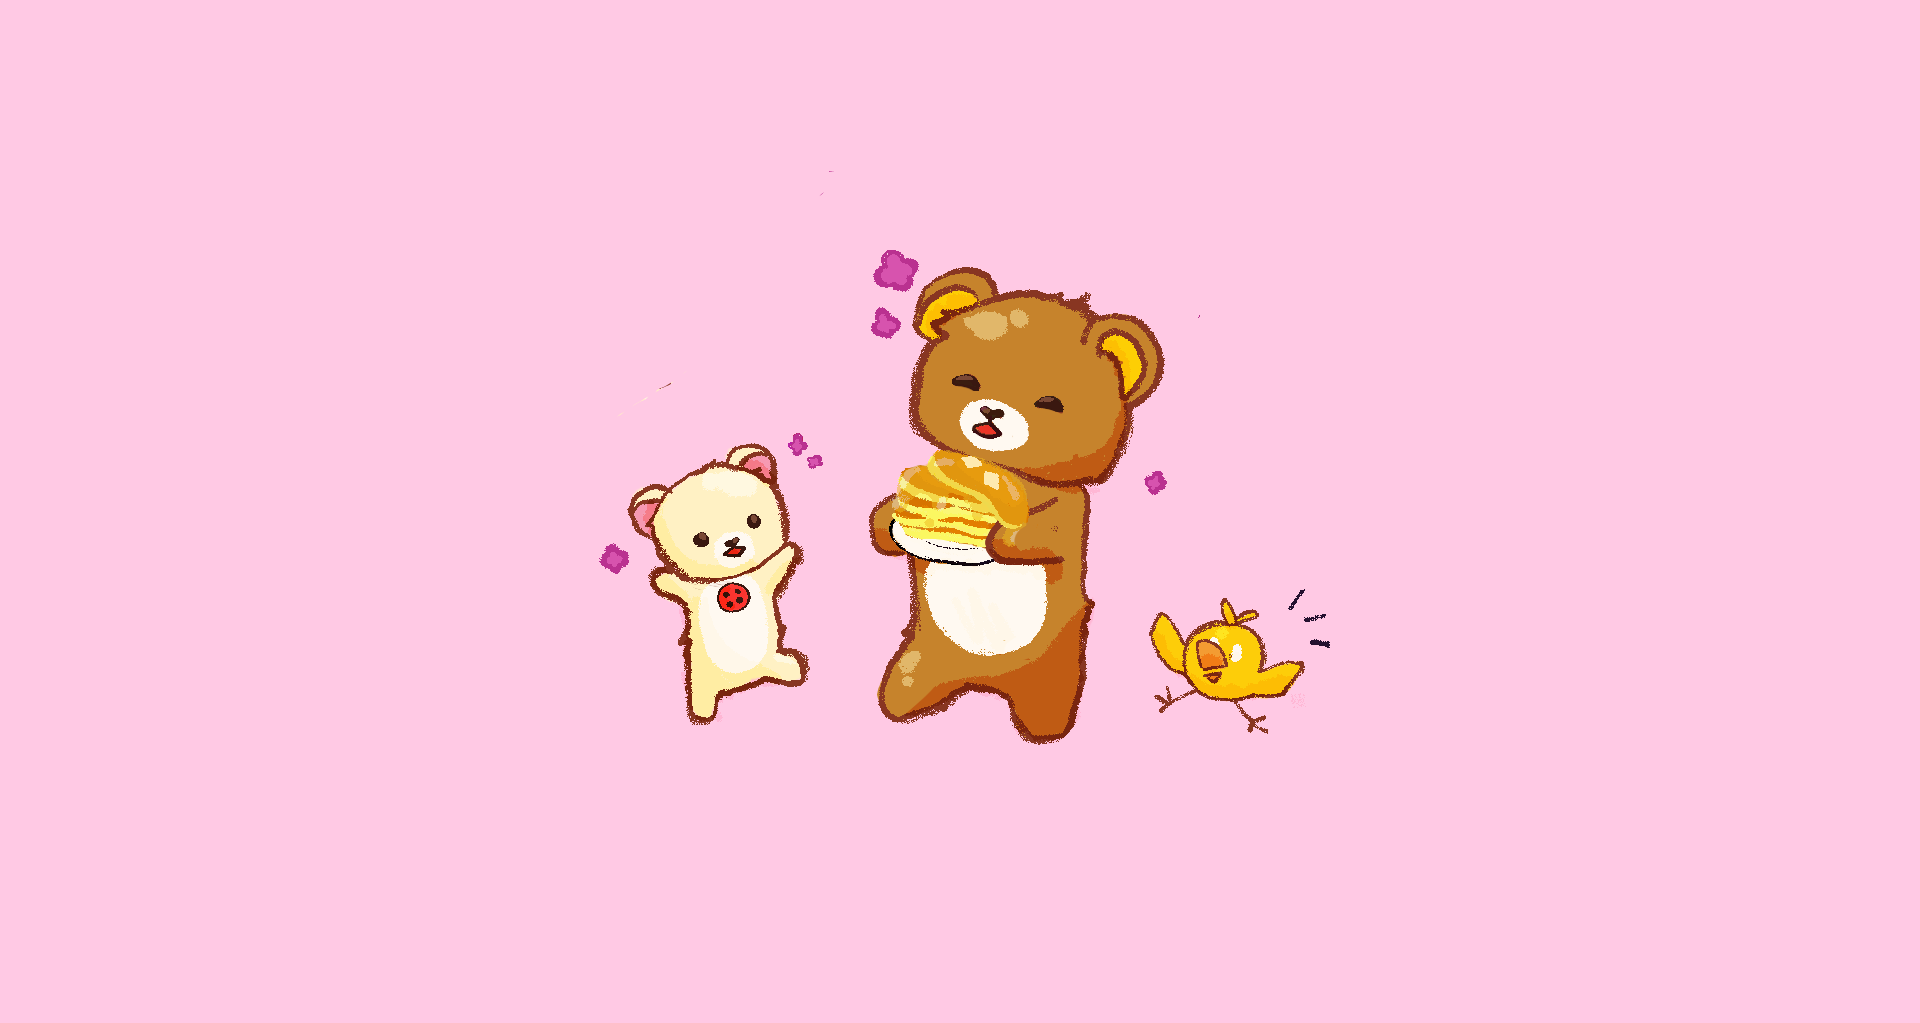 I made this wallpaper as a gift for Valentines Day rrilakkuma